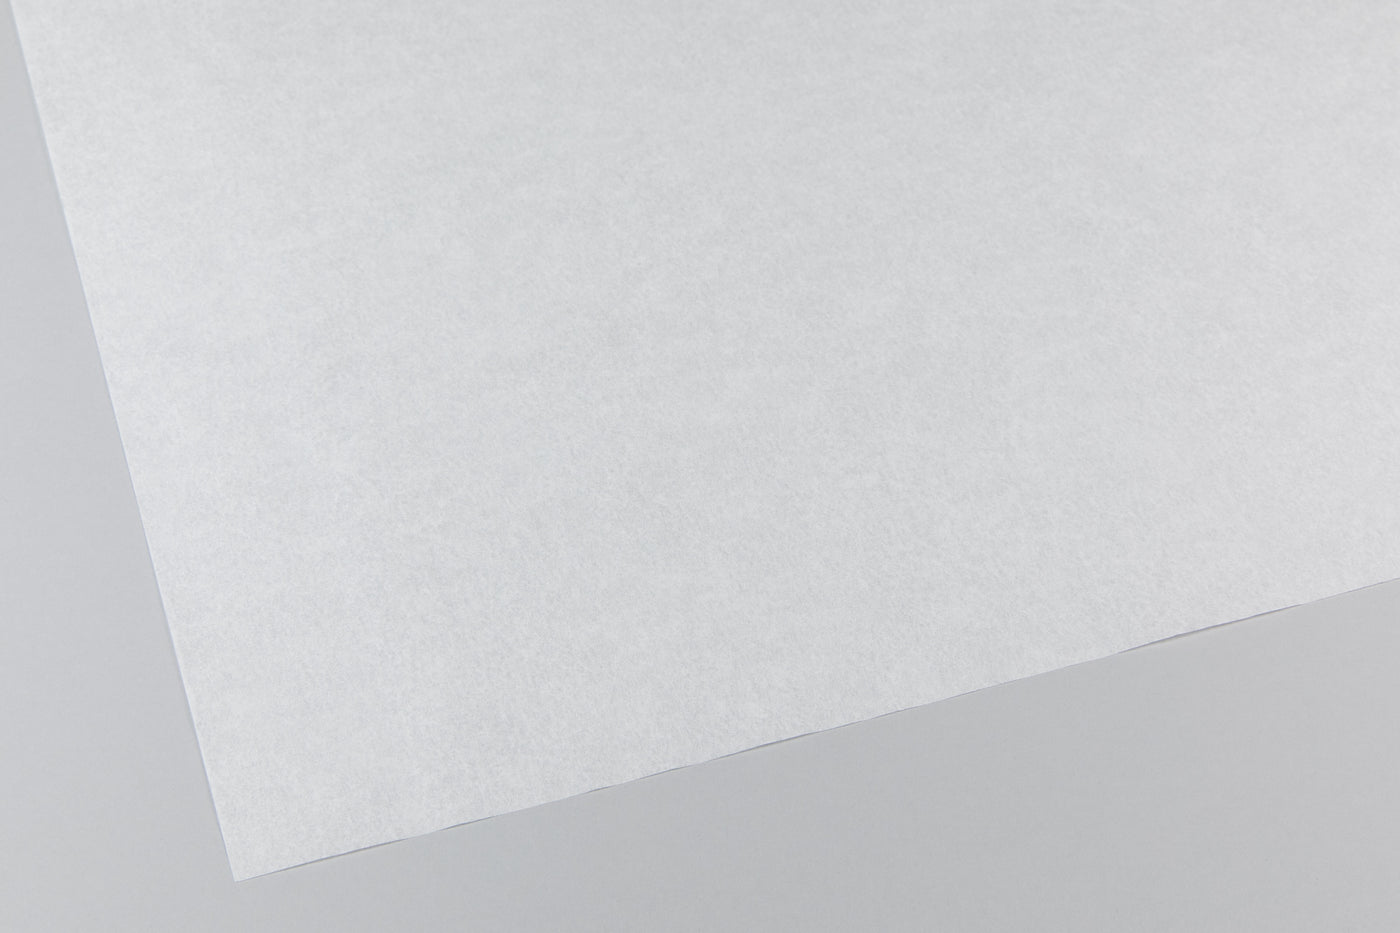 Two sided Siliconised Greaseproof Paper sheets